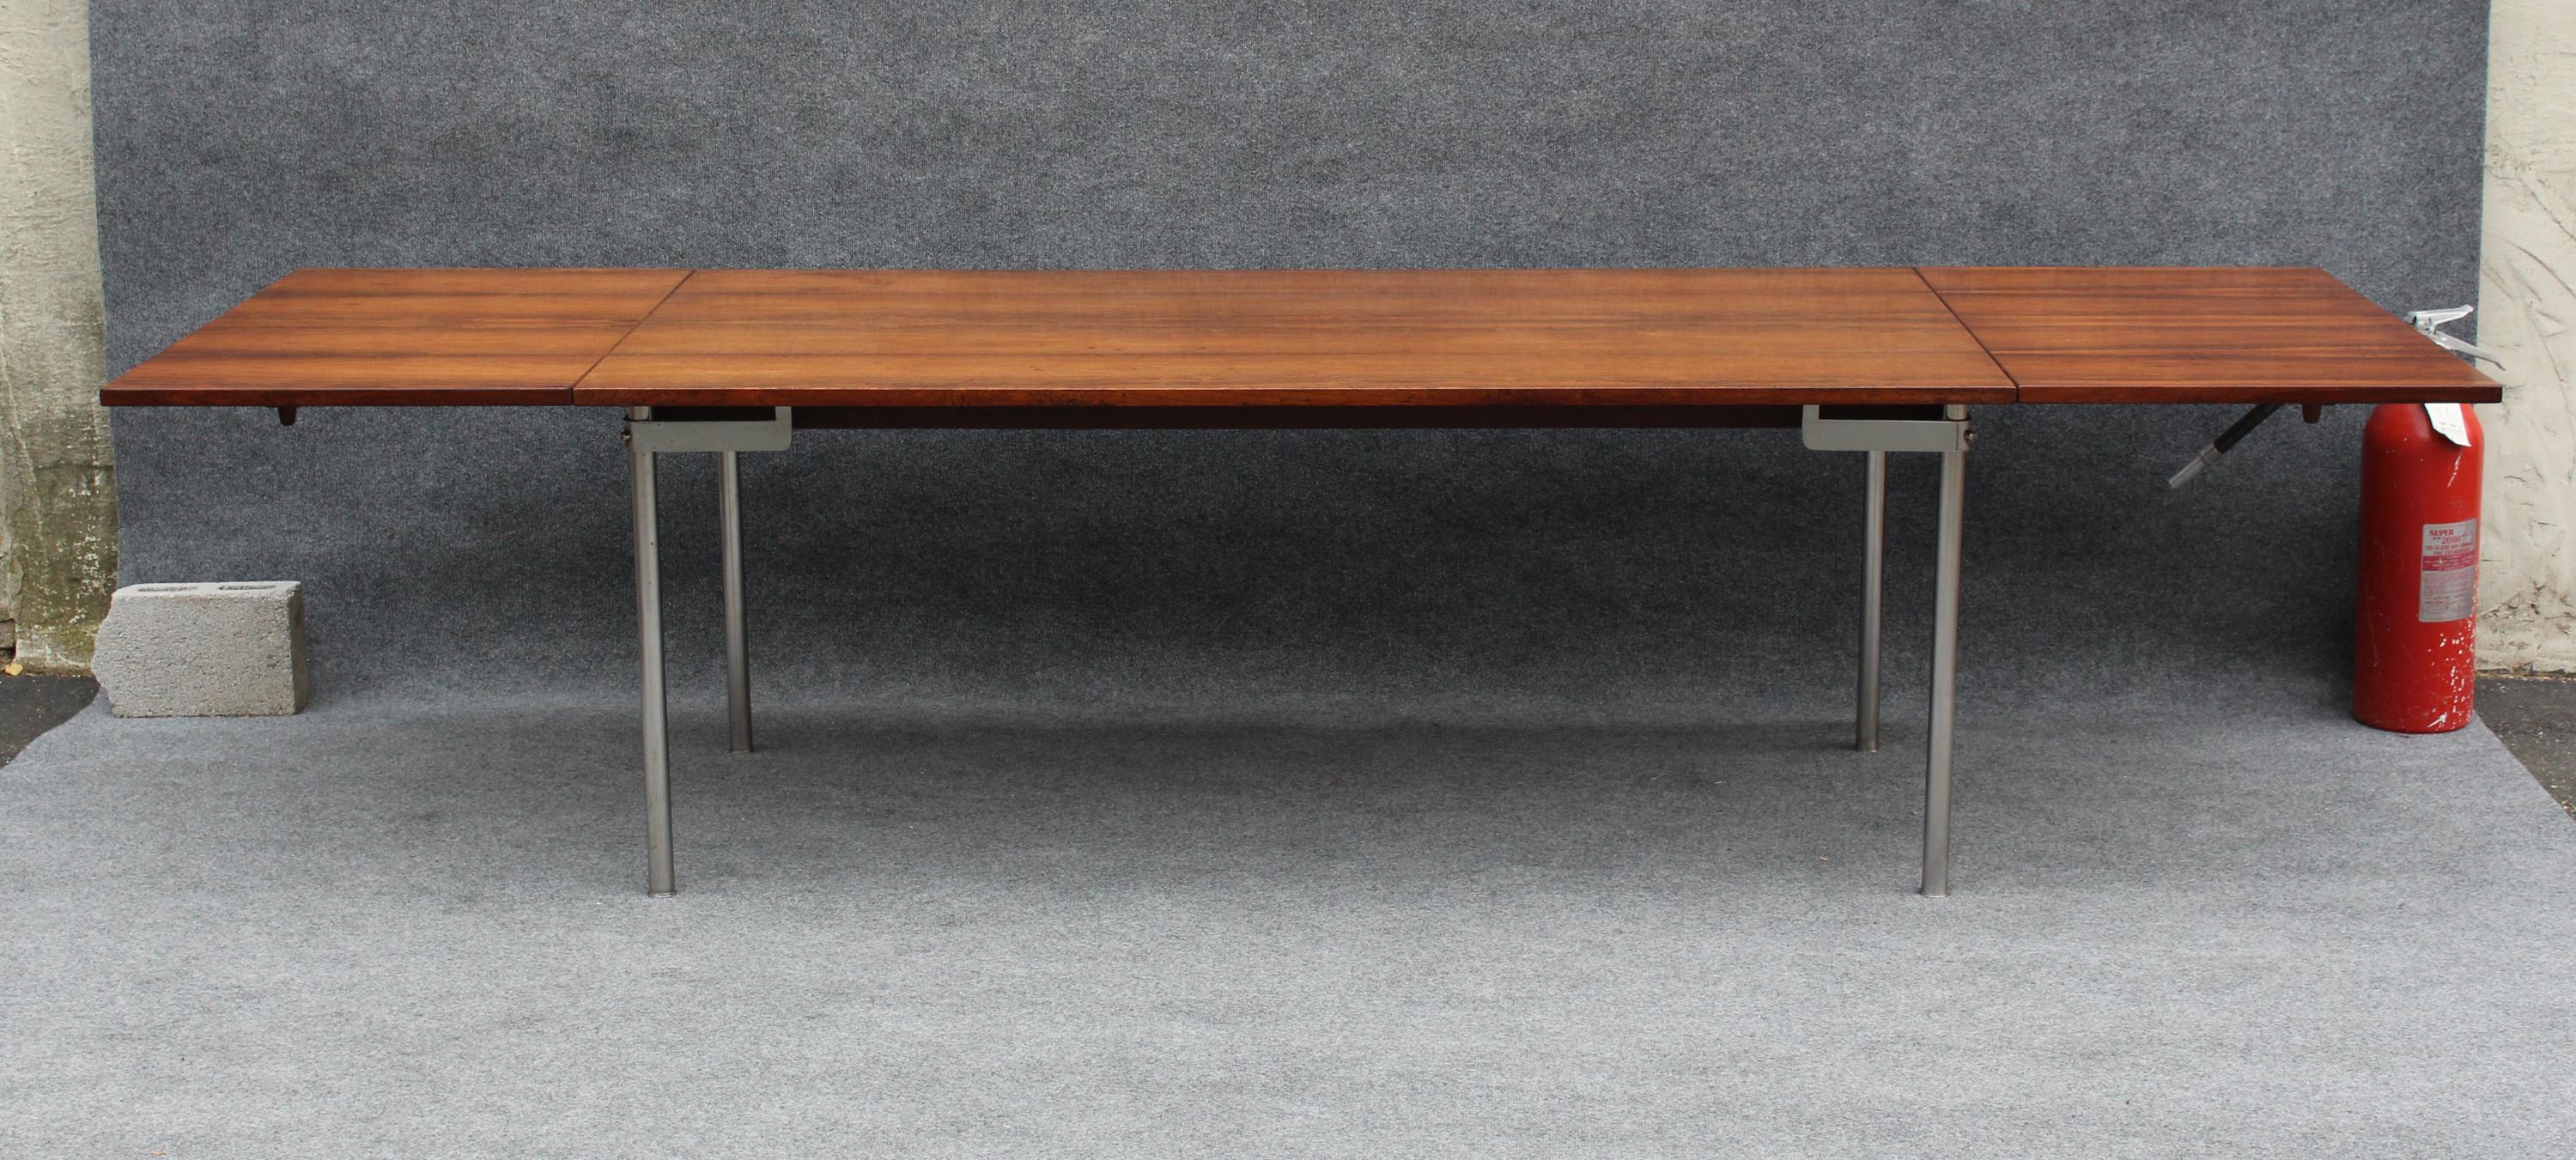 Mid-20th Century Restored Hans J. Wegner for Andreas Tuck AT-319 Drop-Leaf Rosewood Dining Table For Sale